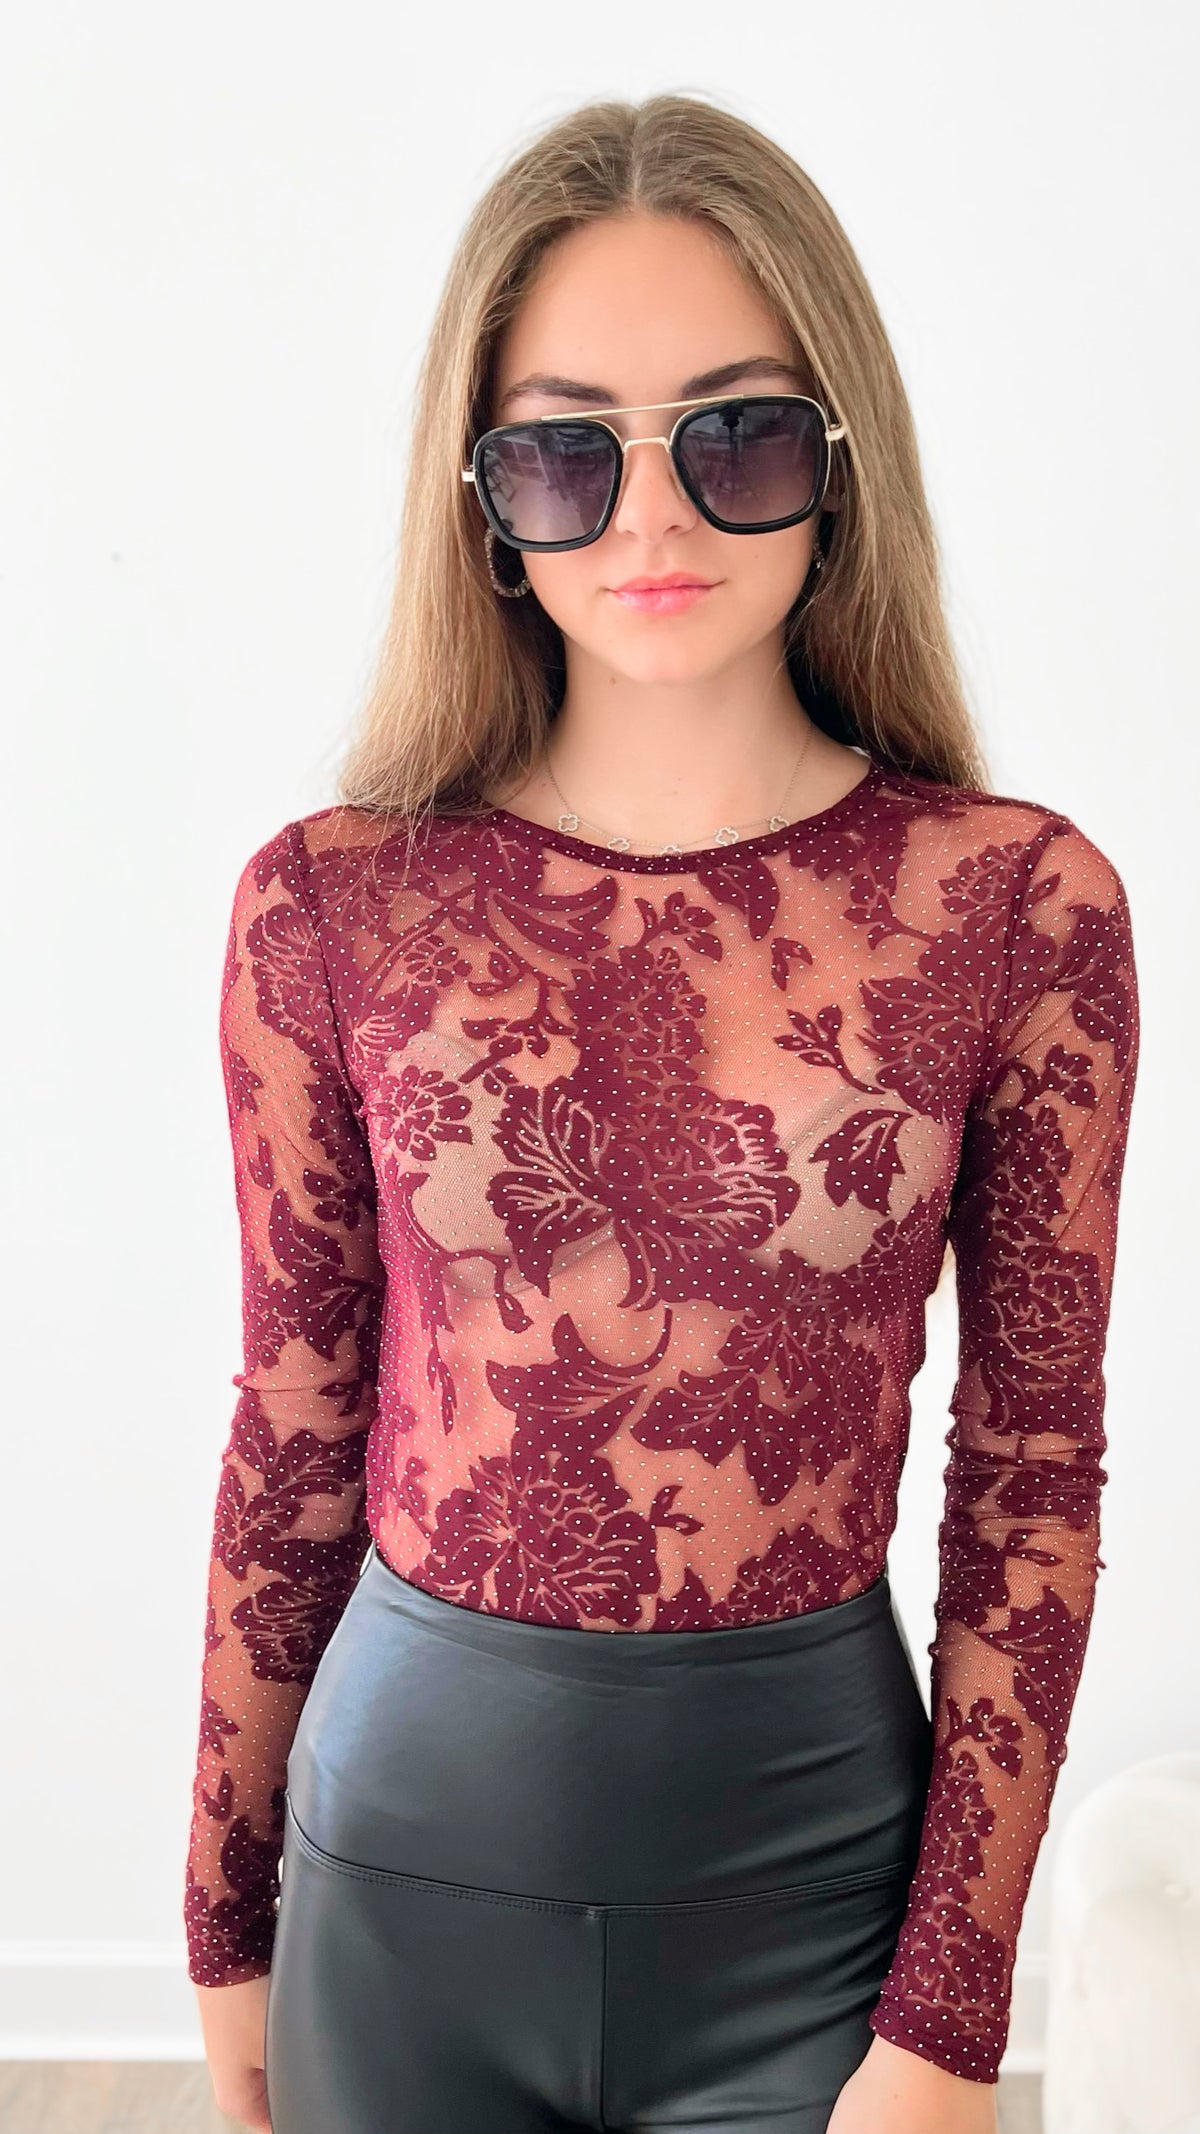 Glam Girl Floral Lace Mesh Bodysuit - Burgundy-130 Long Sleeve Tops-CES FEMME-Coastal Bloom Boutique, find the trendiest versions of the popular styles and looks Located in Indialantic, FL